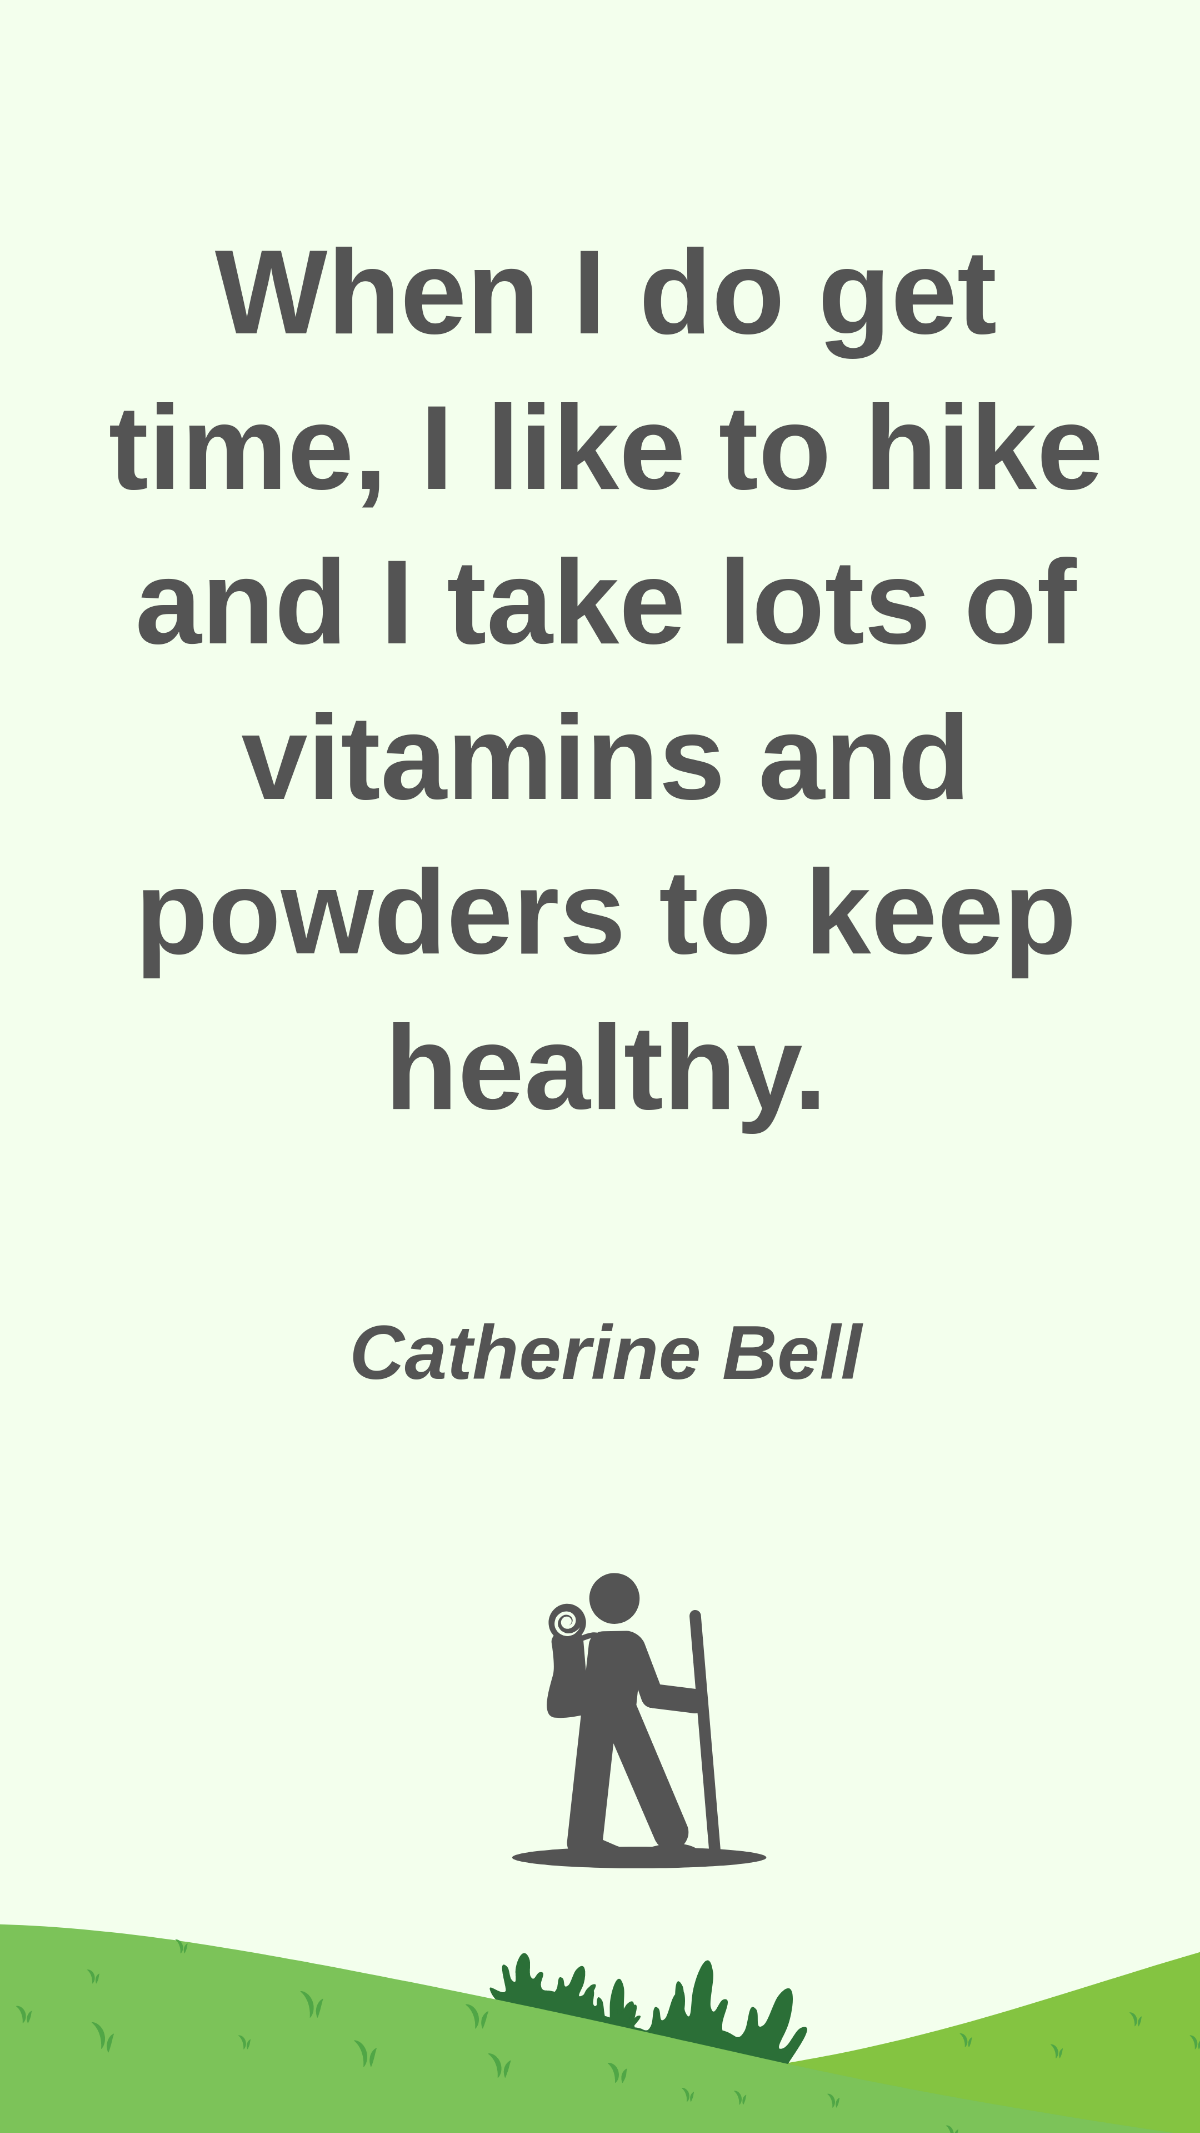 Catherine Bell - When I do get time, I like to hike and I take lots of vitamins and powders to keep healthy. Template